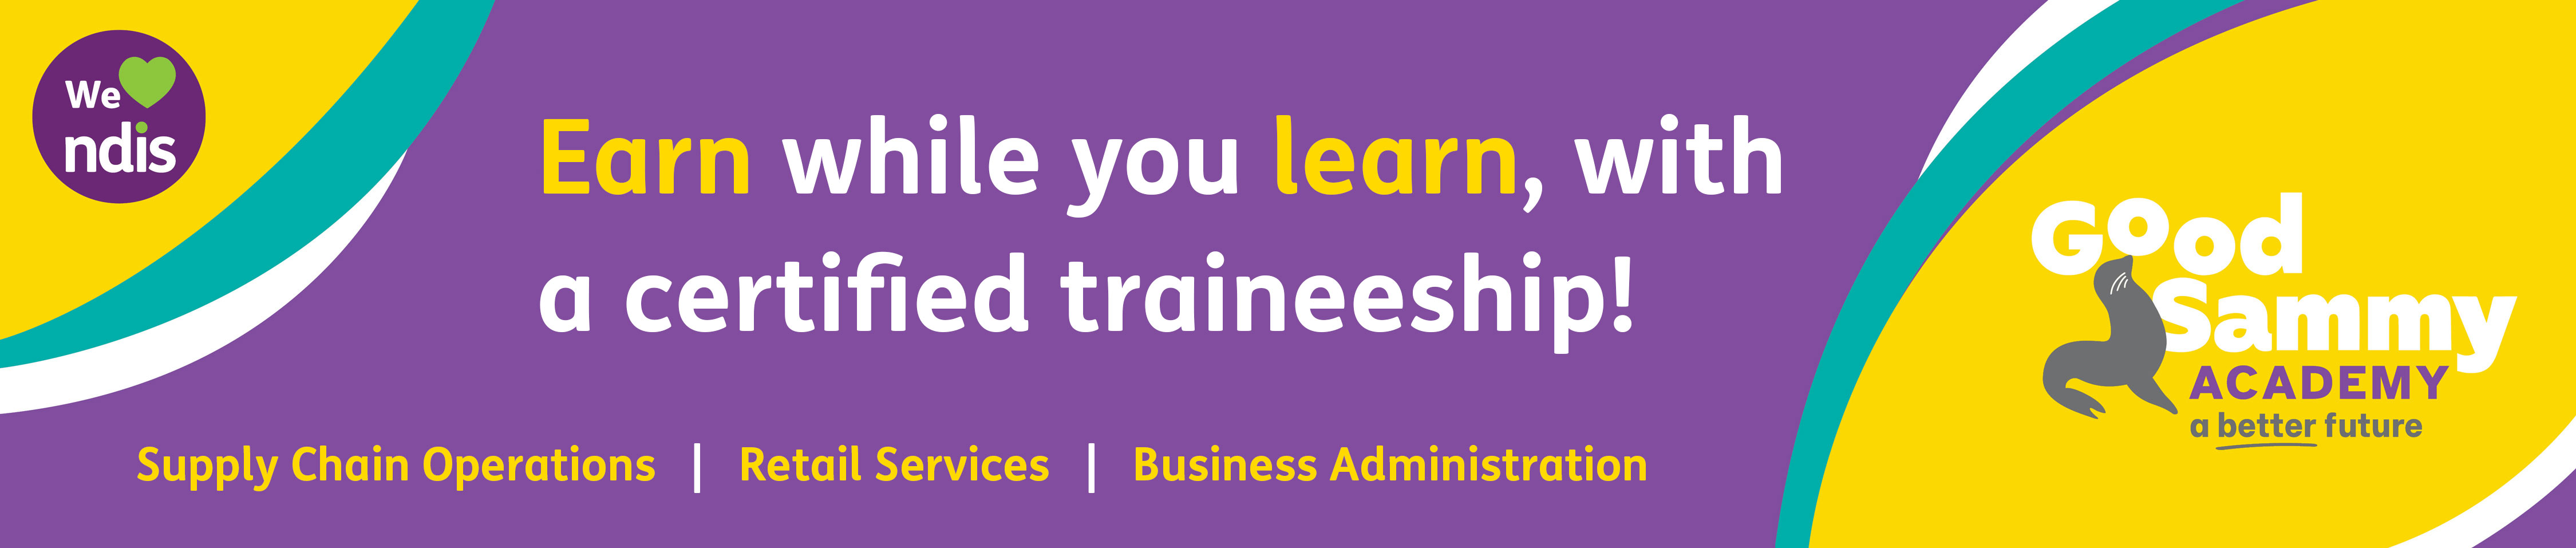 Earn while you learn with a certified traineeship